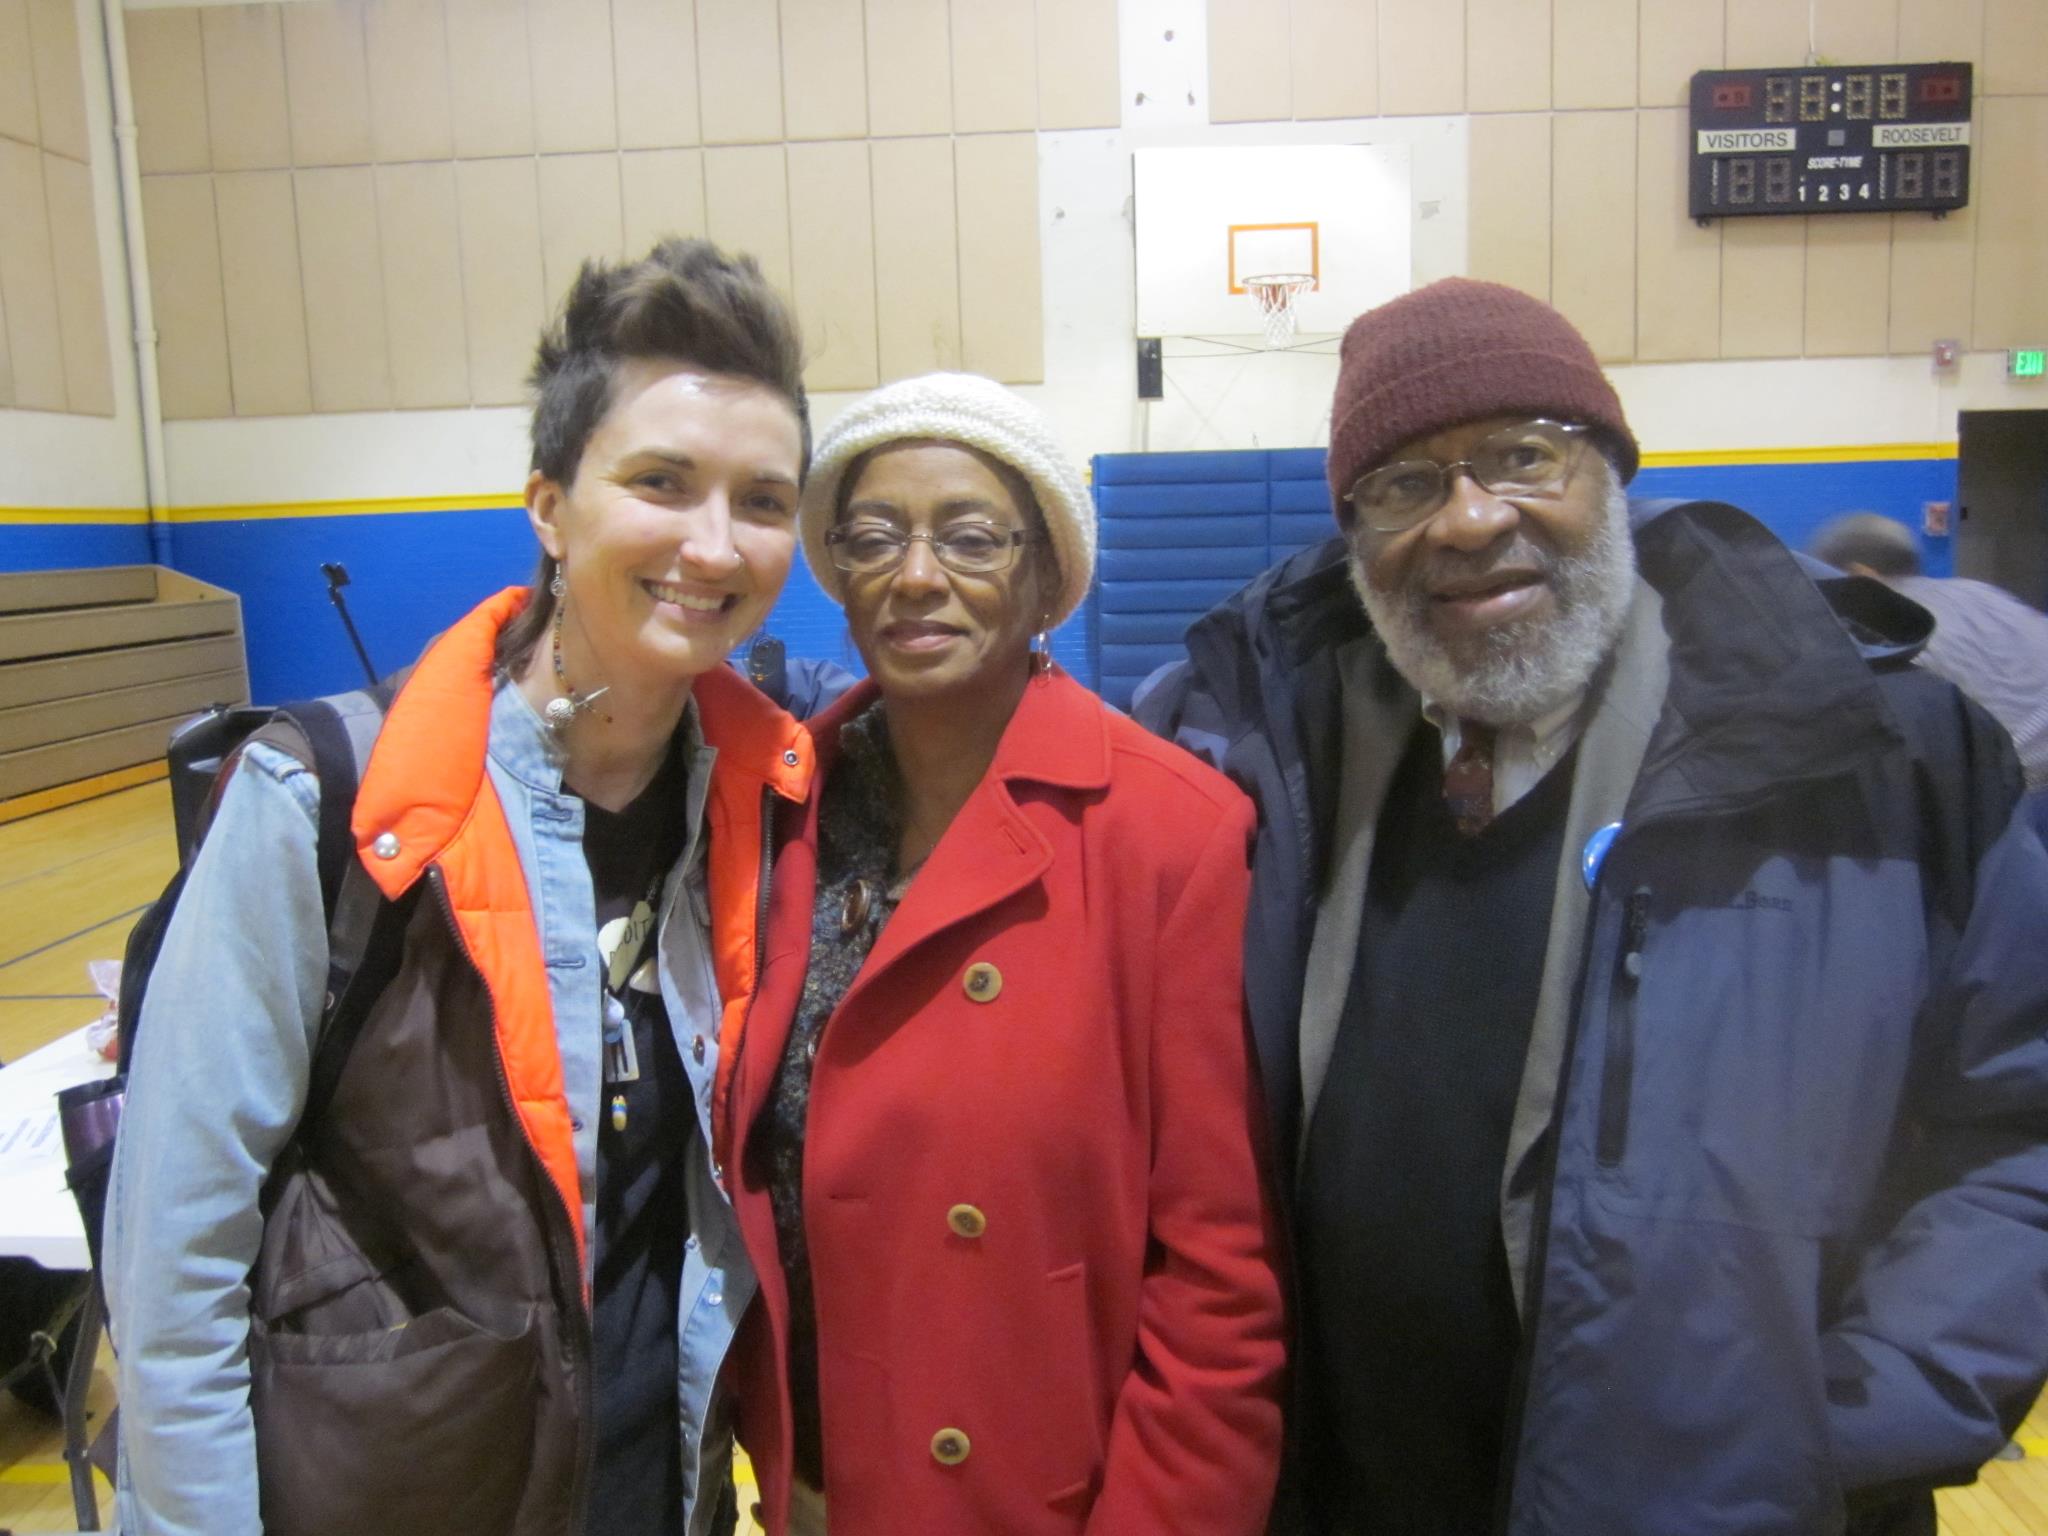 Joanna Shenk with Aljosie and Vincent Harding at the Historic Roosevelt Center in Elkhart, Ind. 